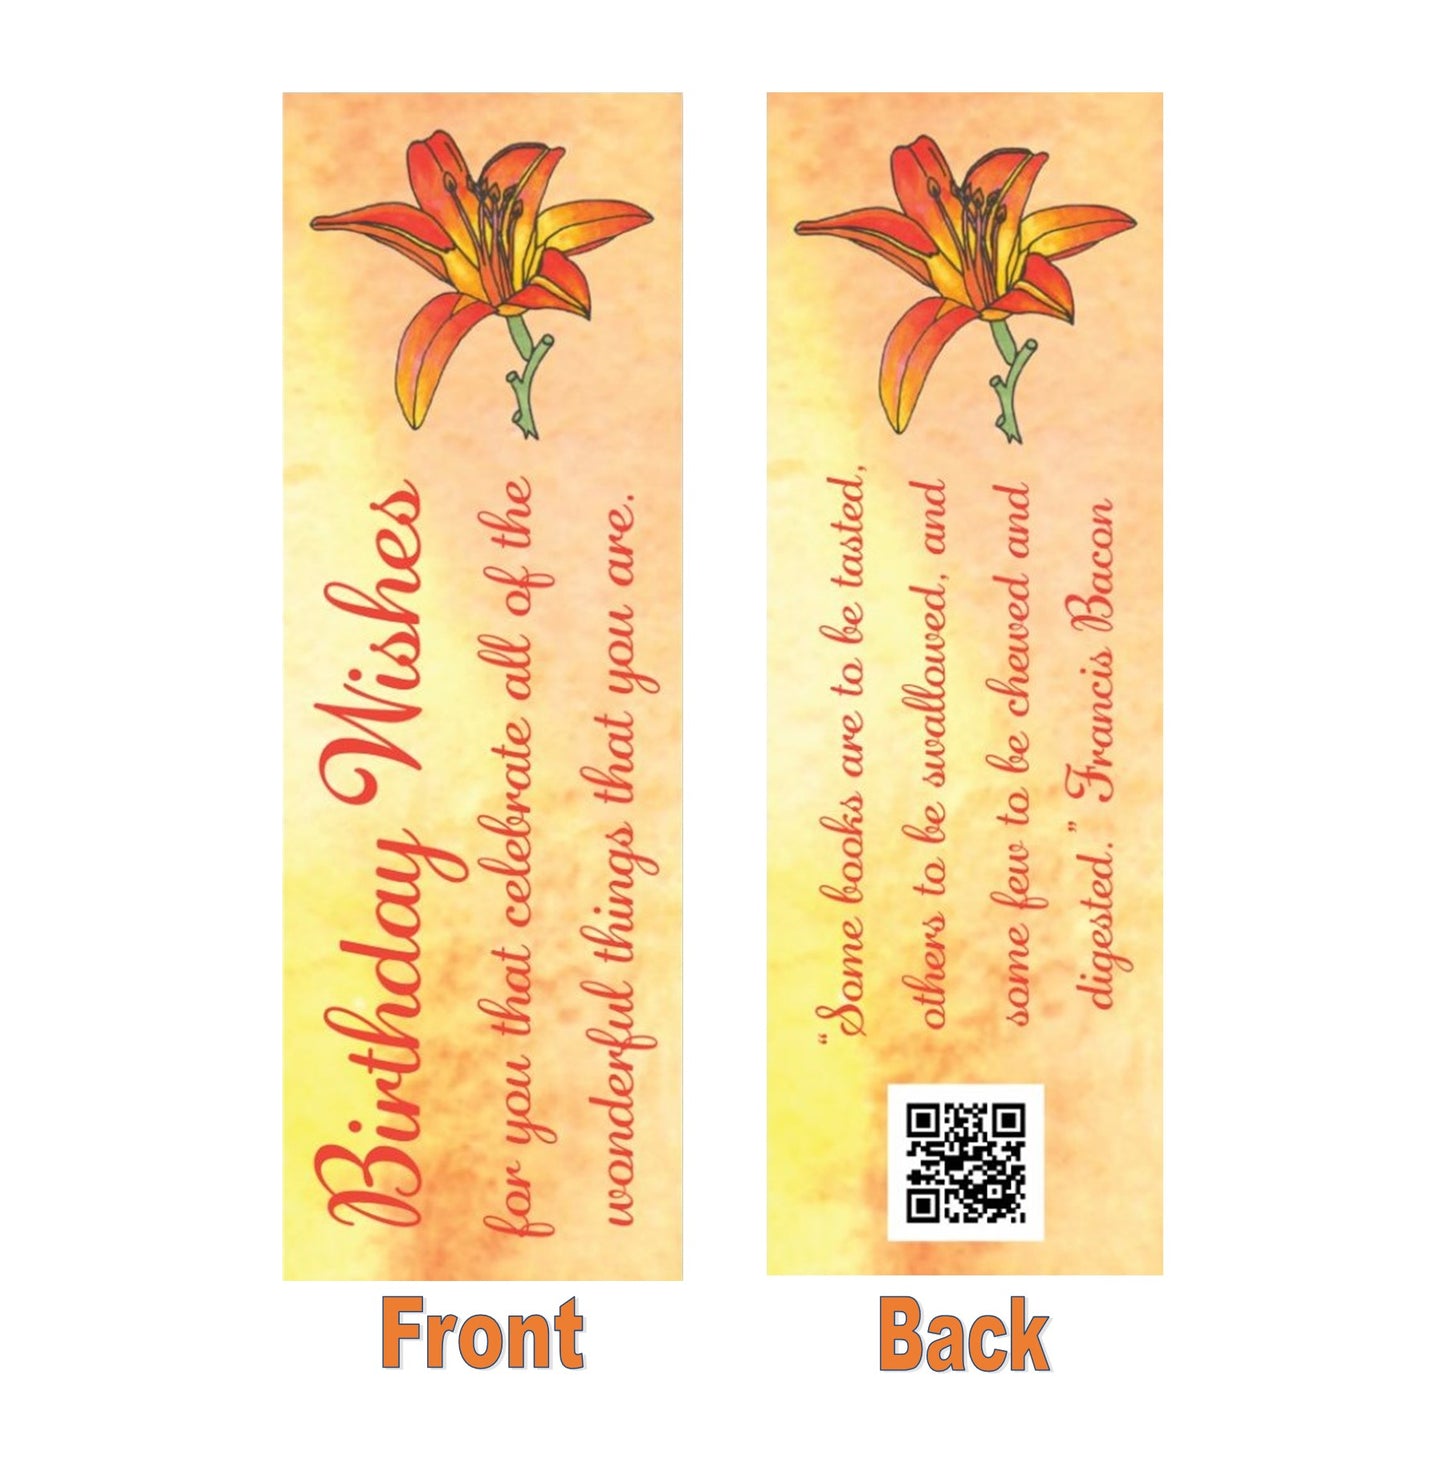 Bookmarks - Birthday Bookmarks - Set of 3 Different Birthday Bookmarks - Book Lover Gift - Reader Gift - Reading Quote (Stationery & More) (Literacy Project)